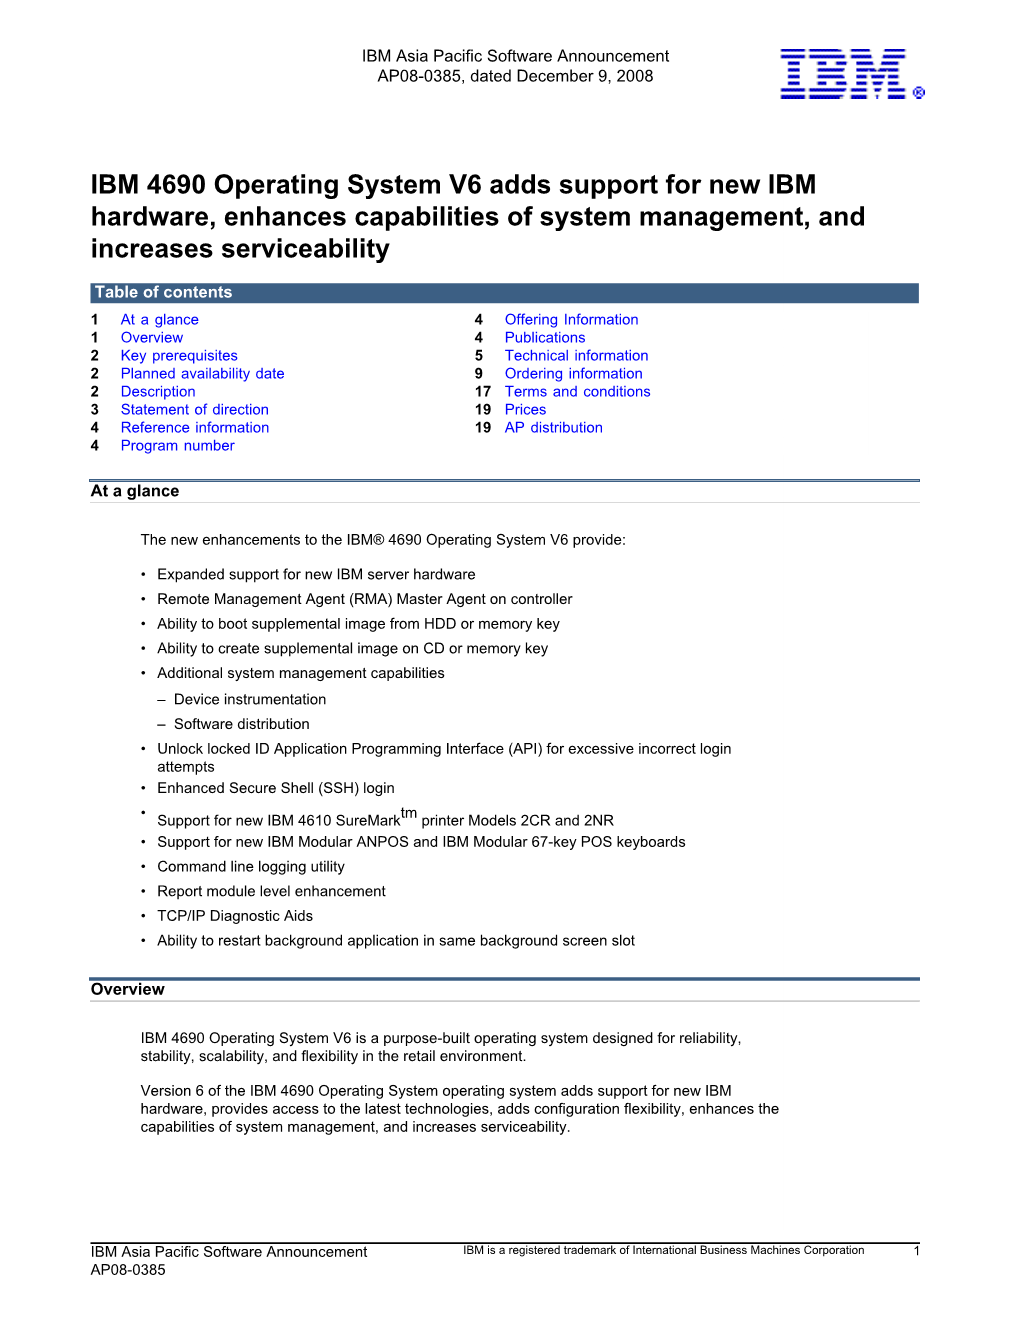 IBM 4690 Operating System V6 Adds Support for New IBM Hardware, Enhances Capabilities of System Management, and Increases Serviceability